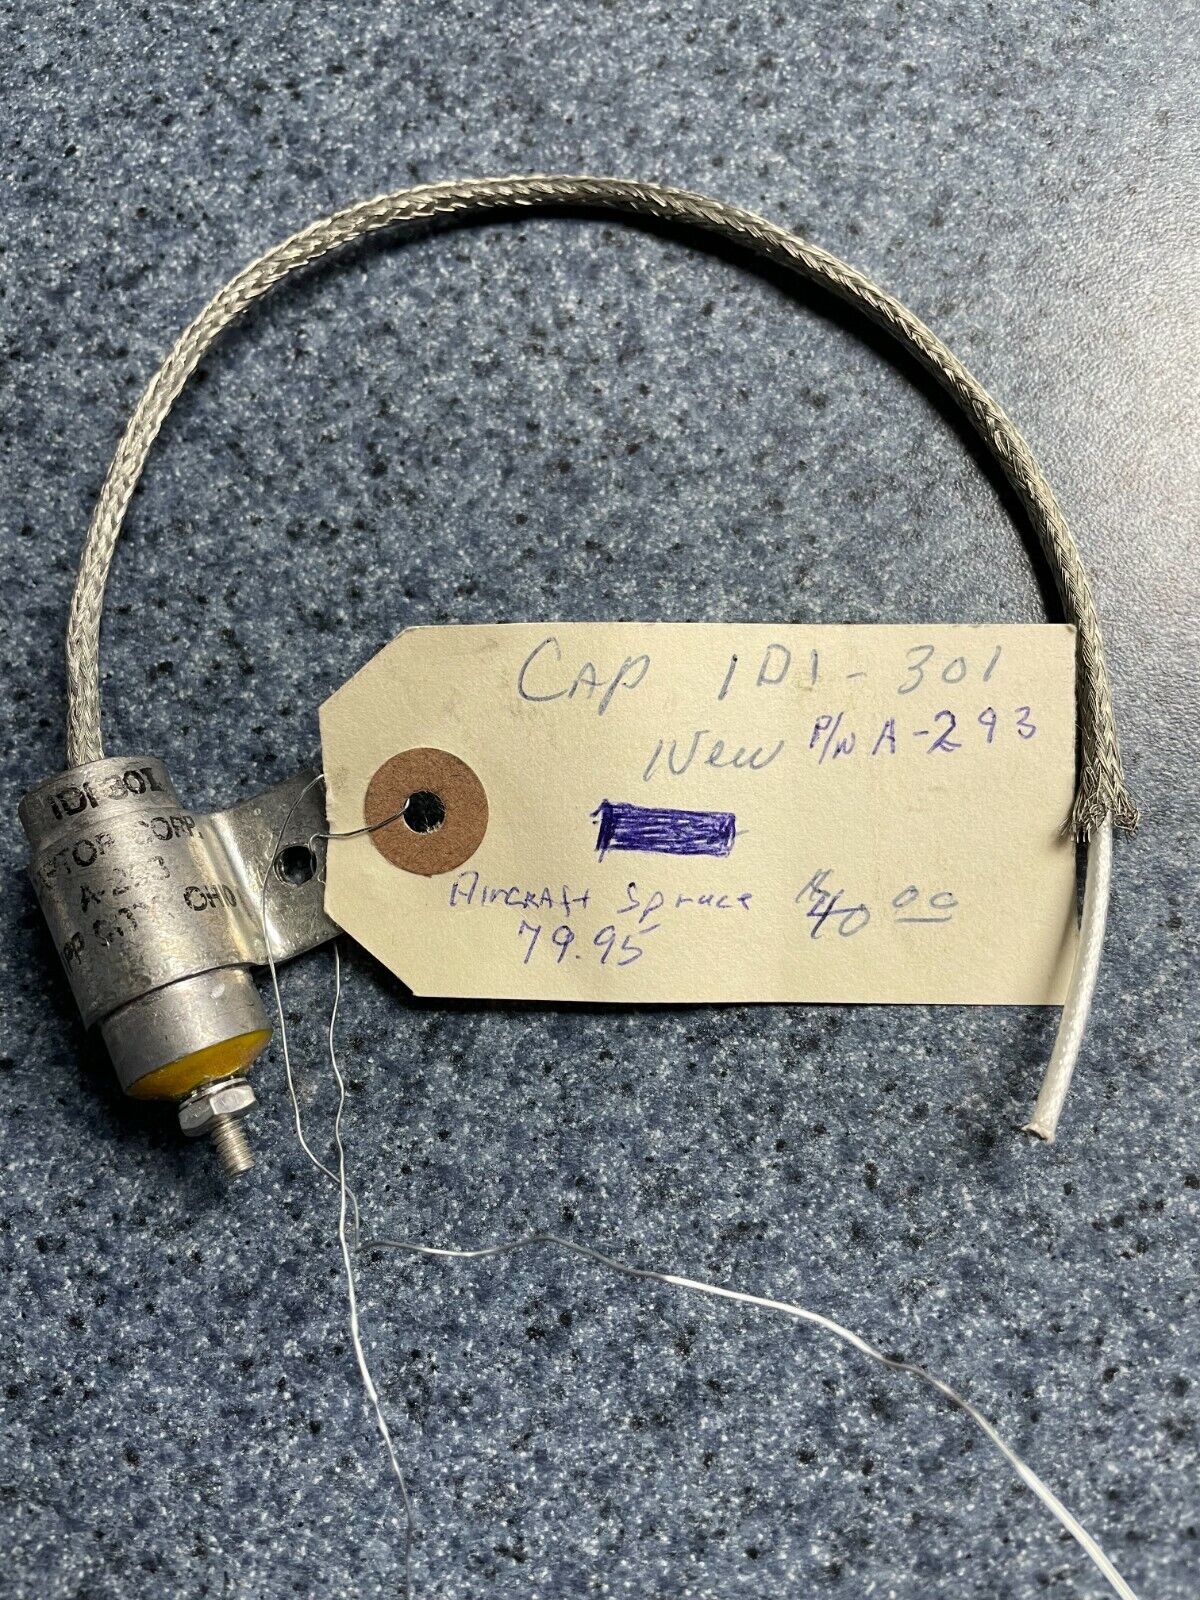 Capacitor A-298